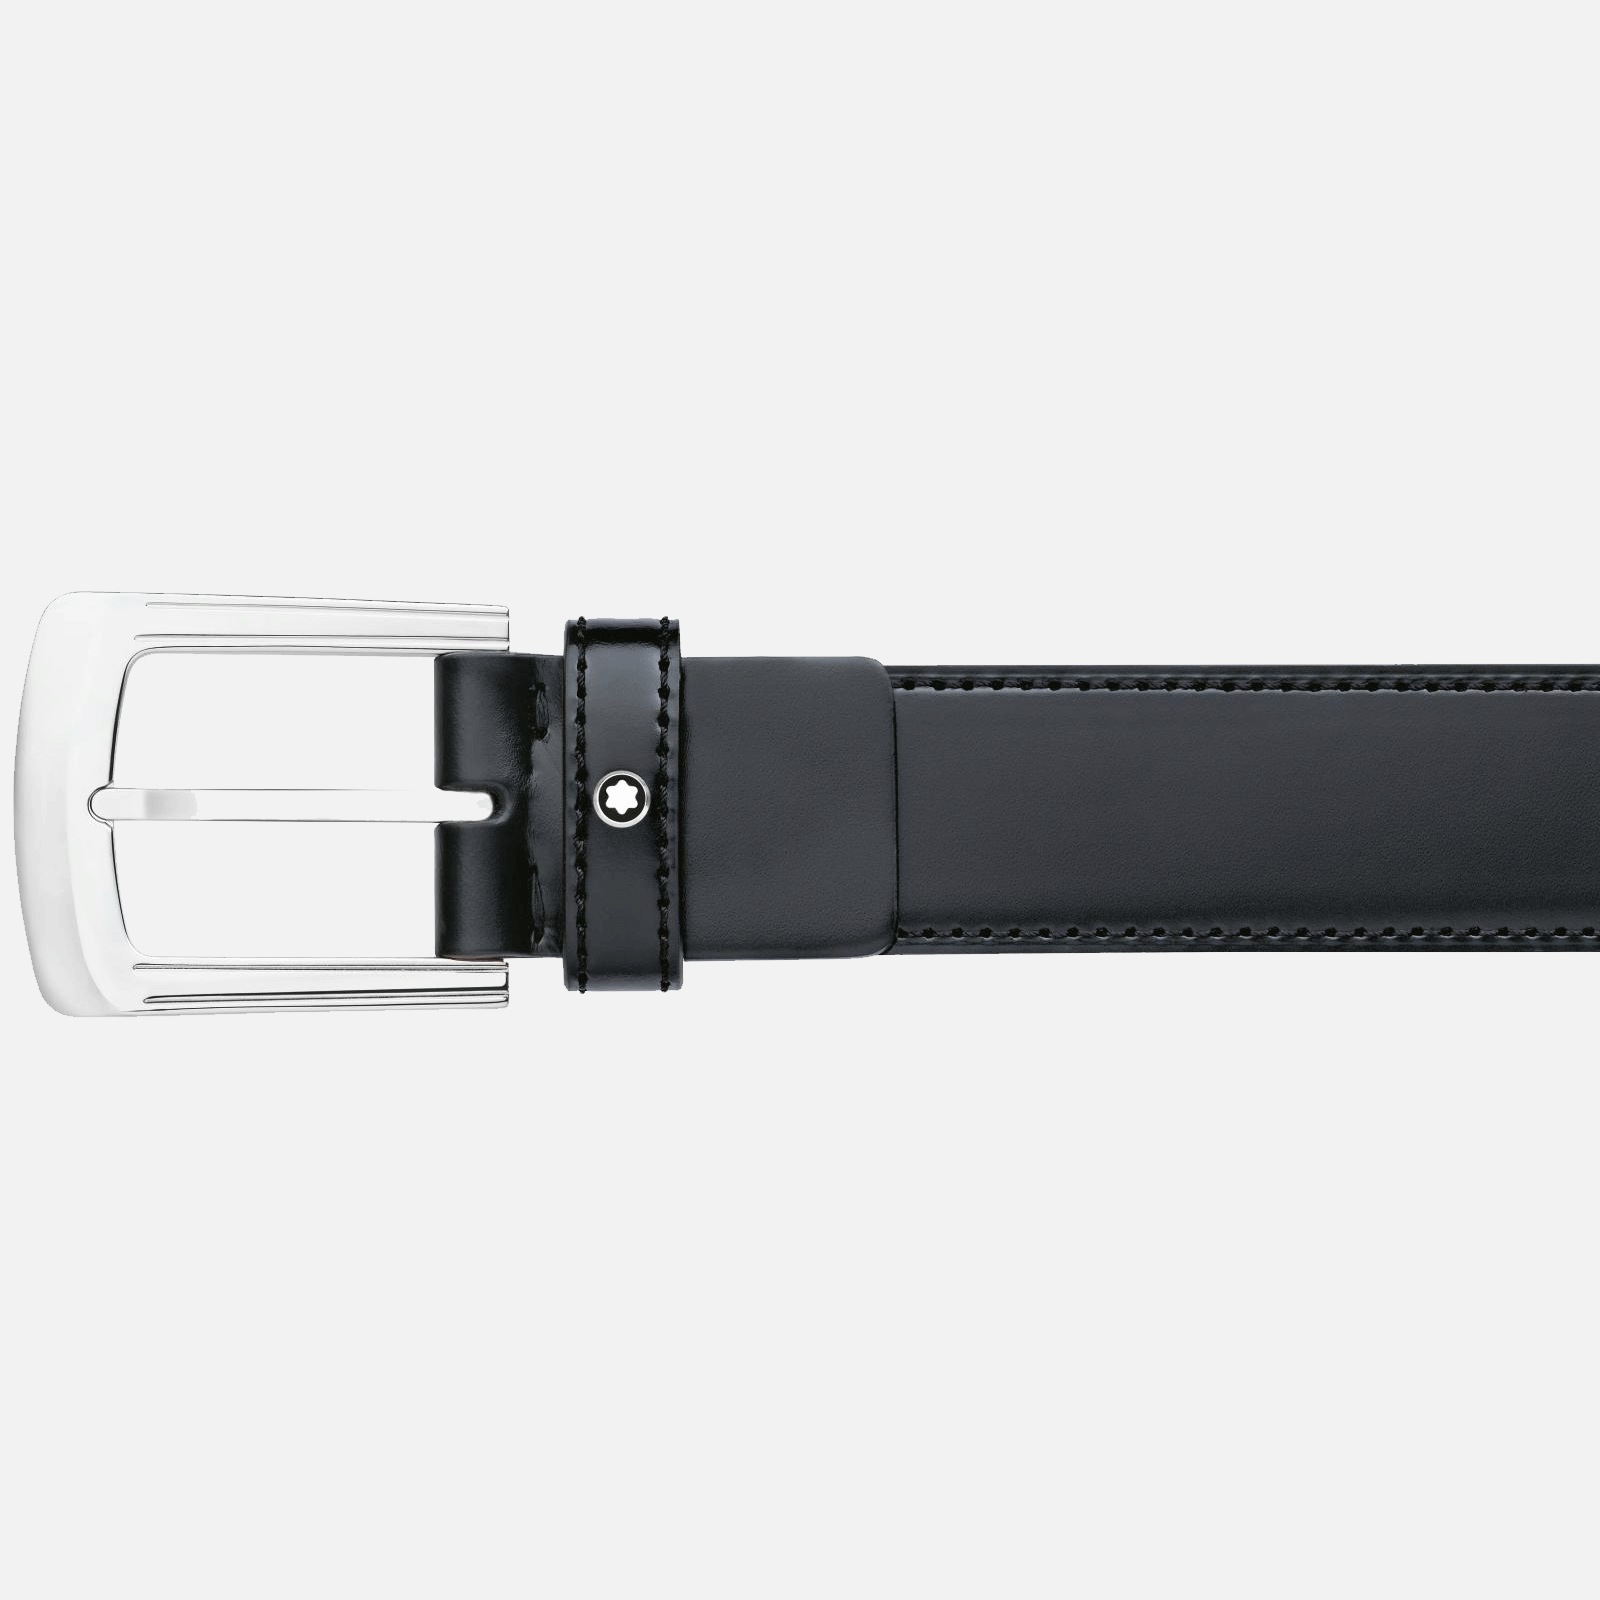 Montblanc Belt Rectangle 3 Rings Motif Shiny Palladium-Coated Pin Black35mm - Pencraft the boutique